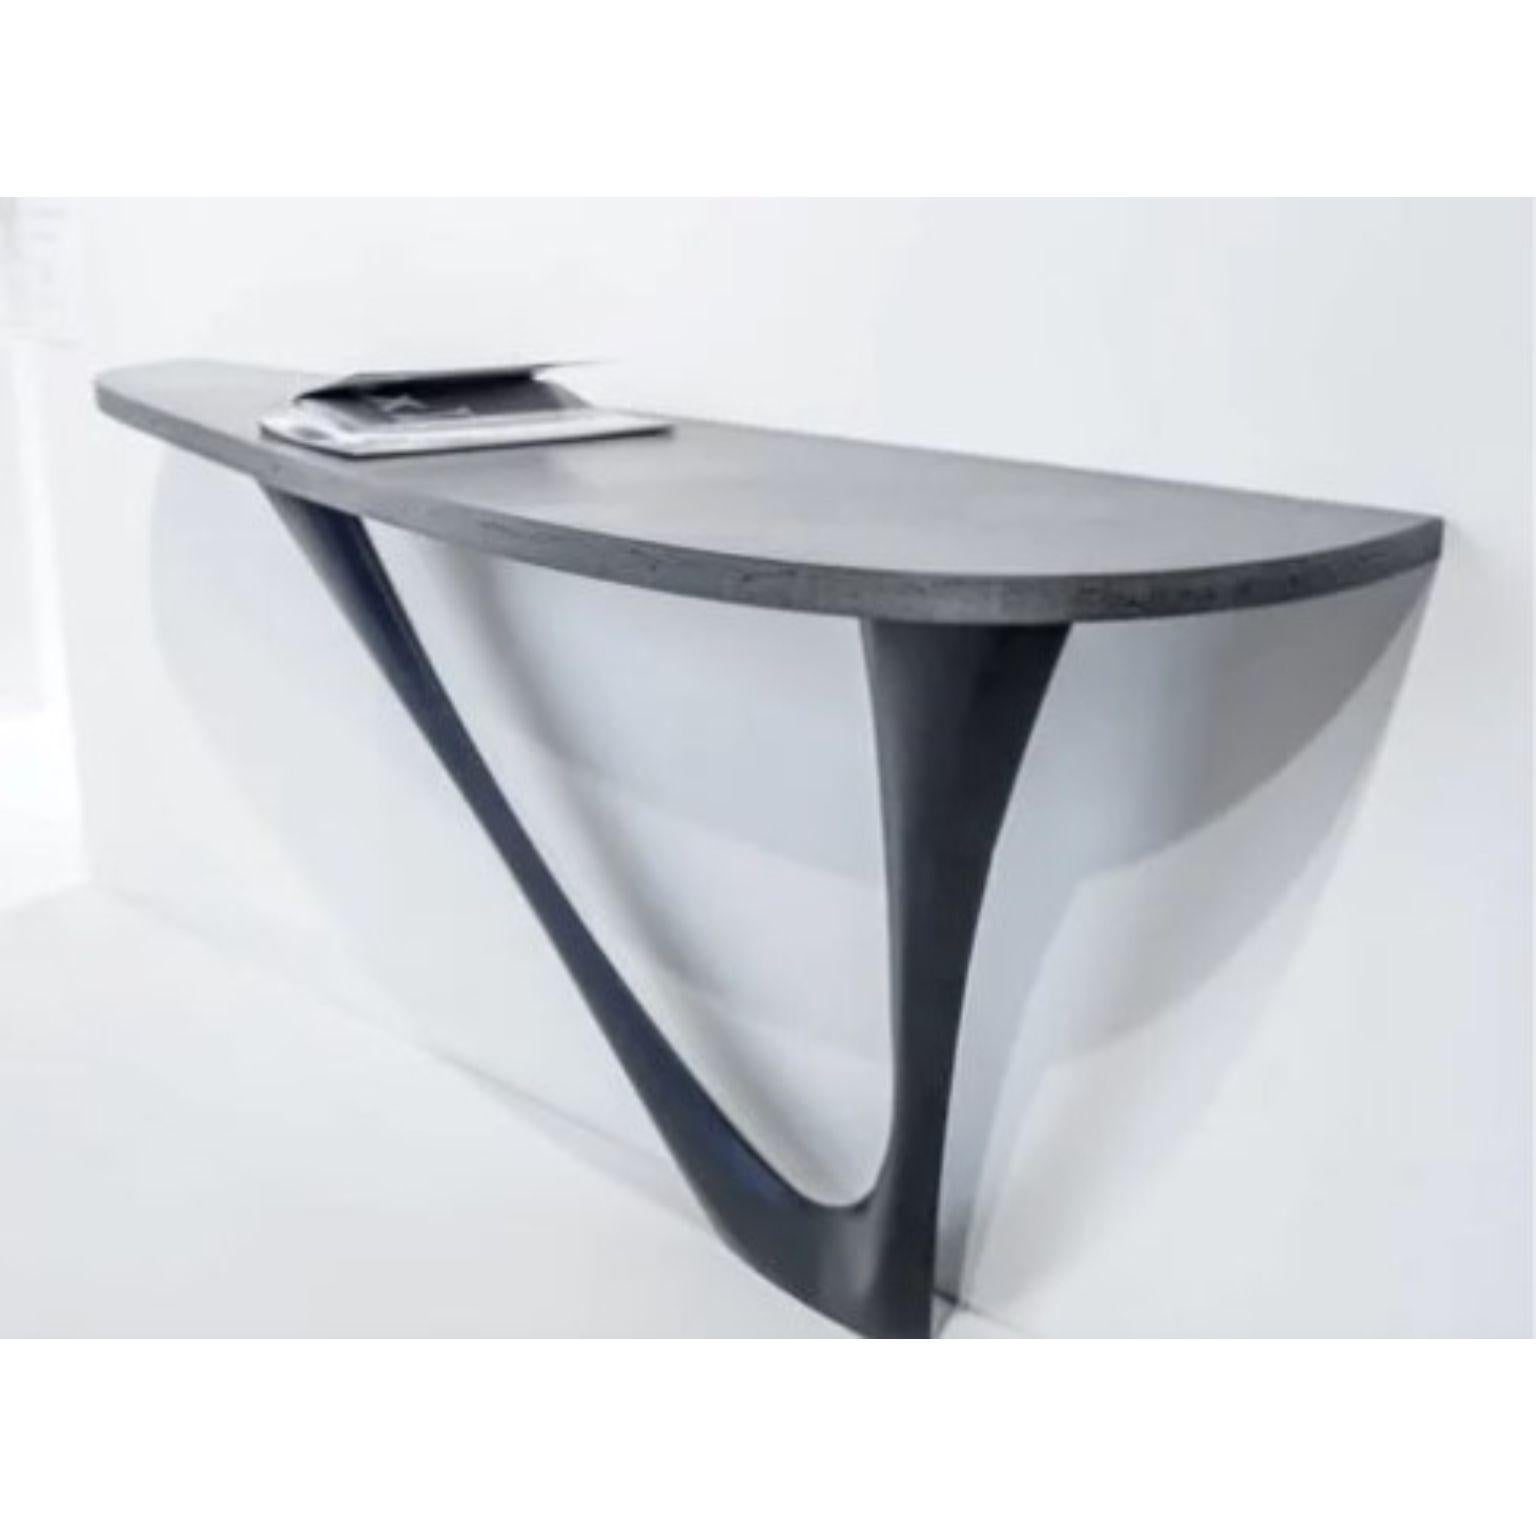 Stone Grey G-Console Steel Base with Steel Top Mono by Zieta For Sale 1